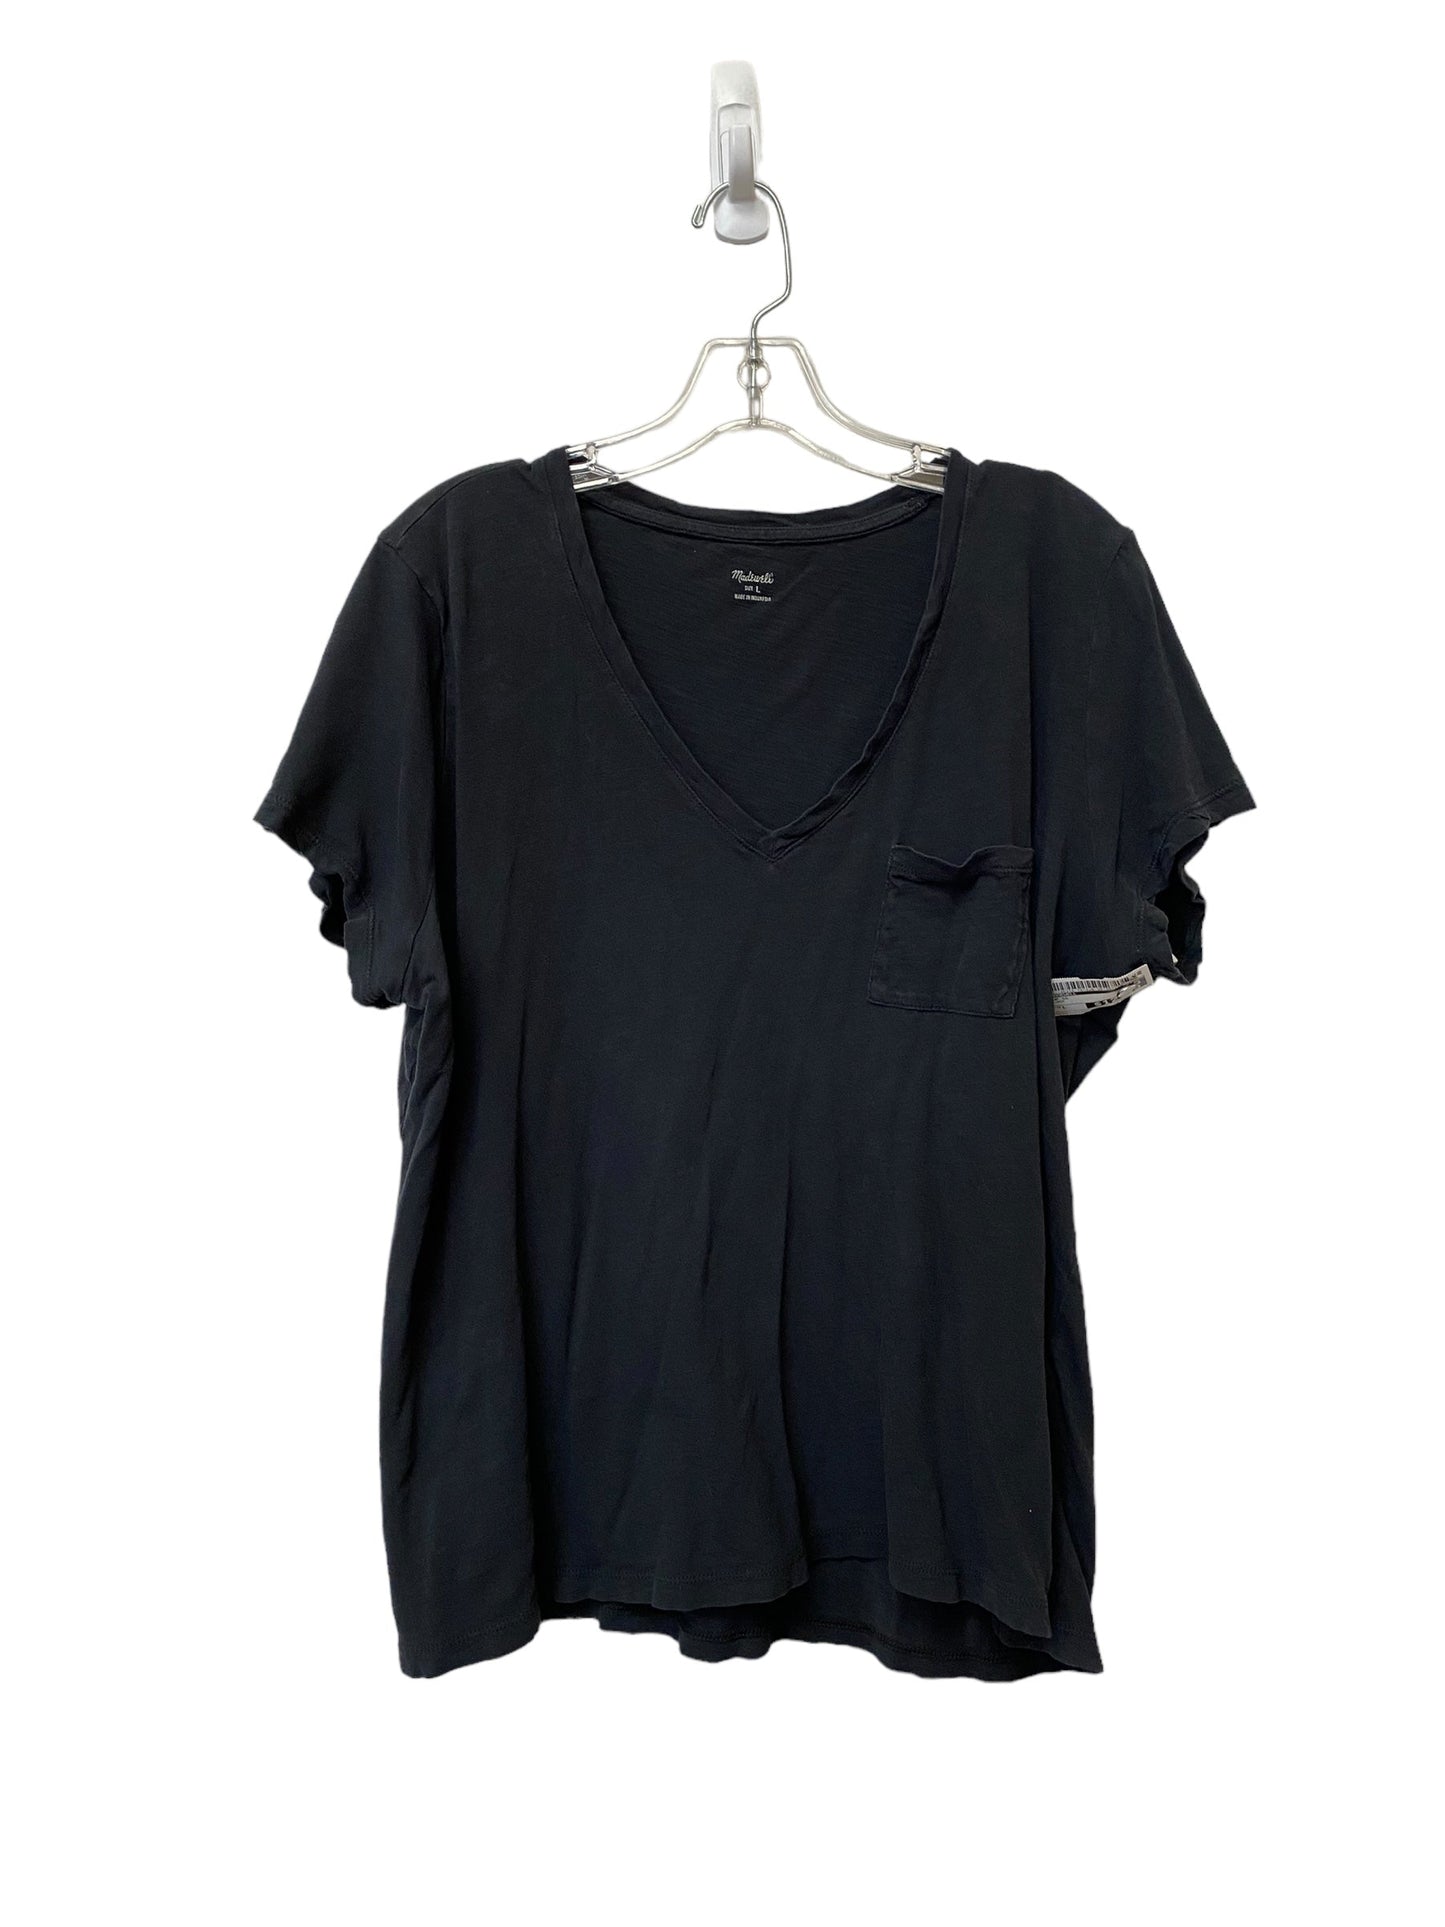 Black Top Short Sleeve Madewell, Size L